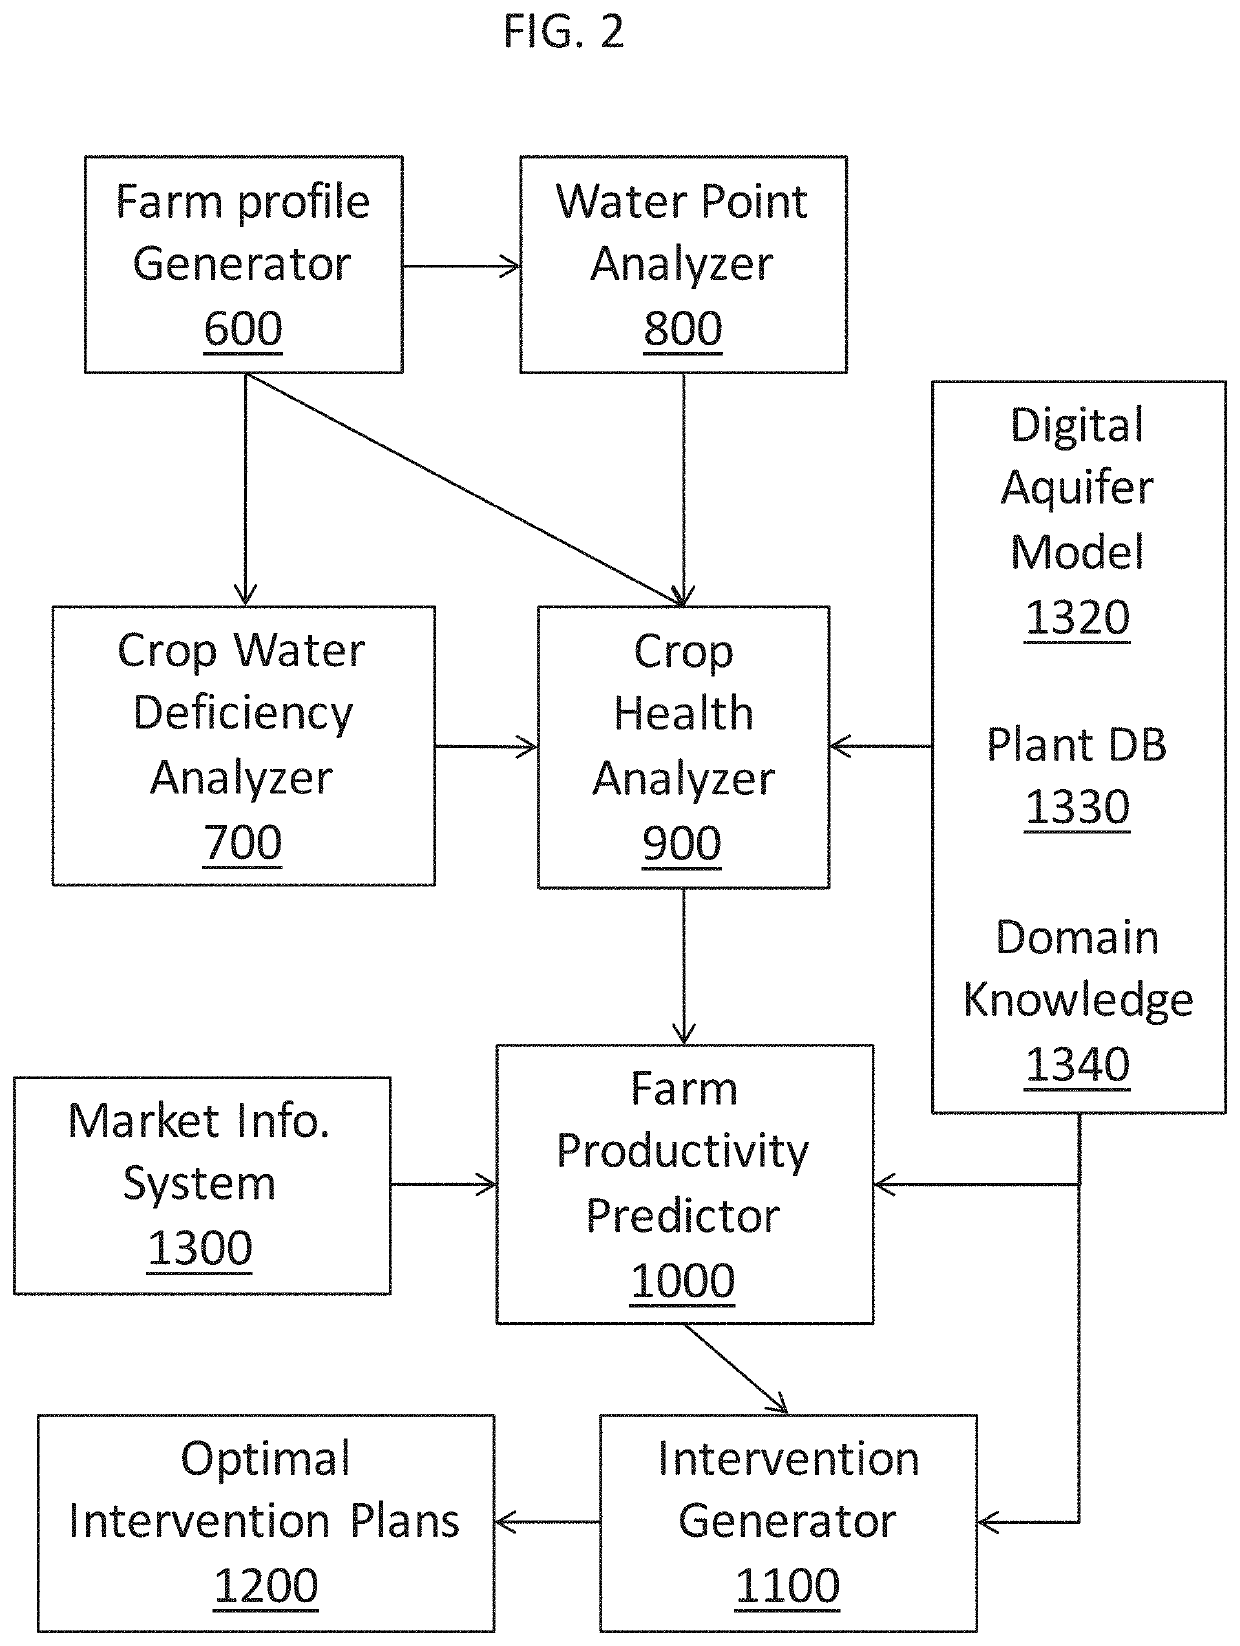 Predicting crop productivity via intervention planning on small-scale farms